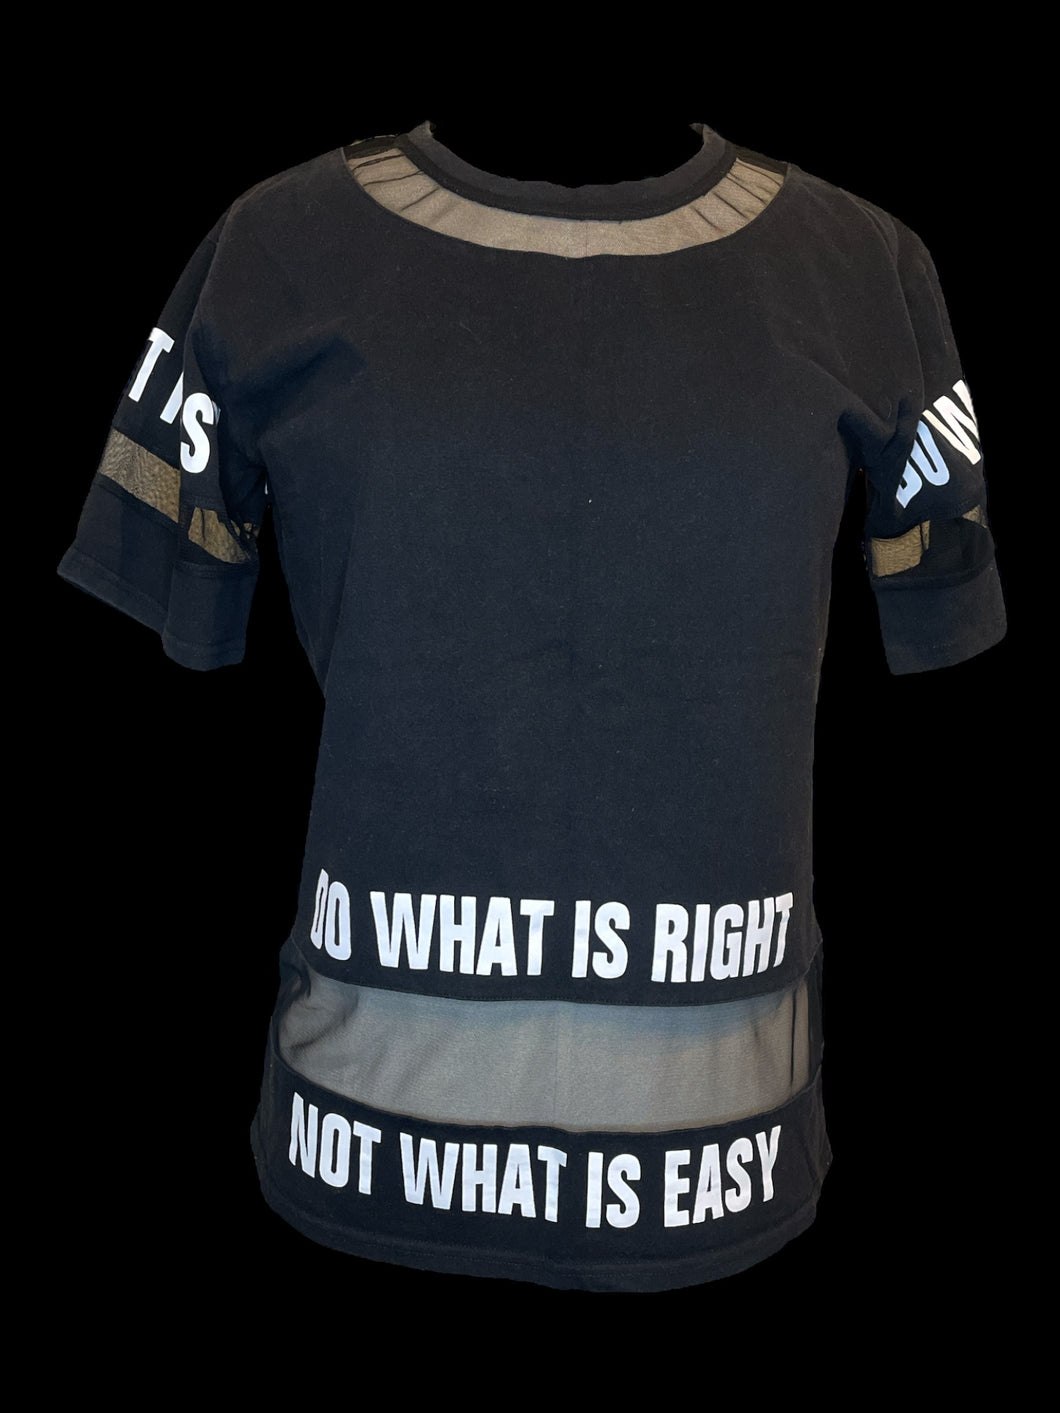 L Black & white short sleeve crew neck top w/ sheer mesh stripes, & “Do What is Right Not What is Easy” text